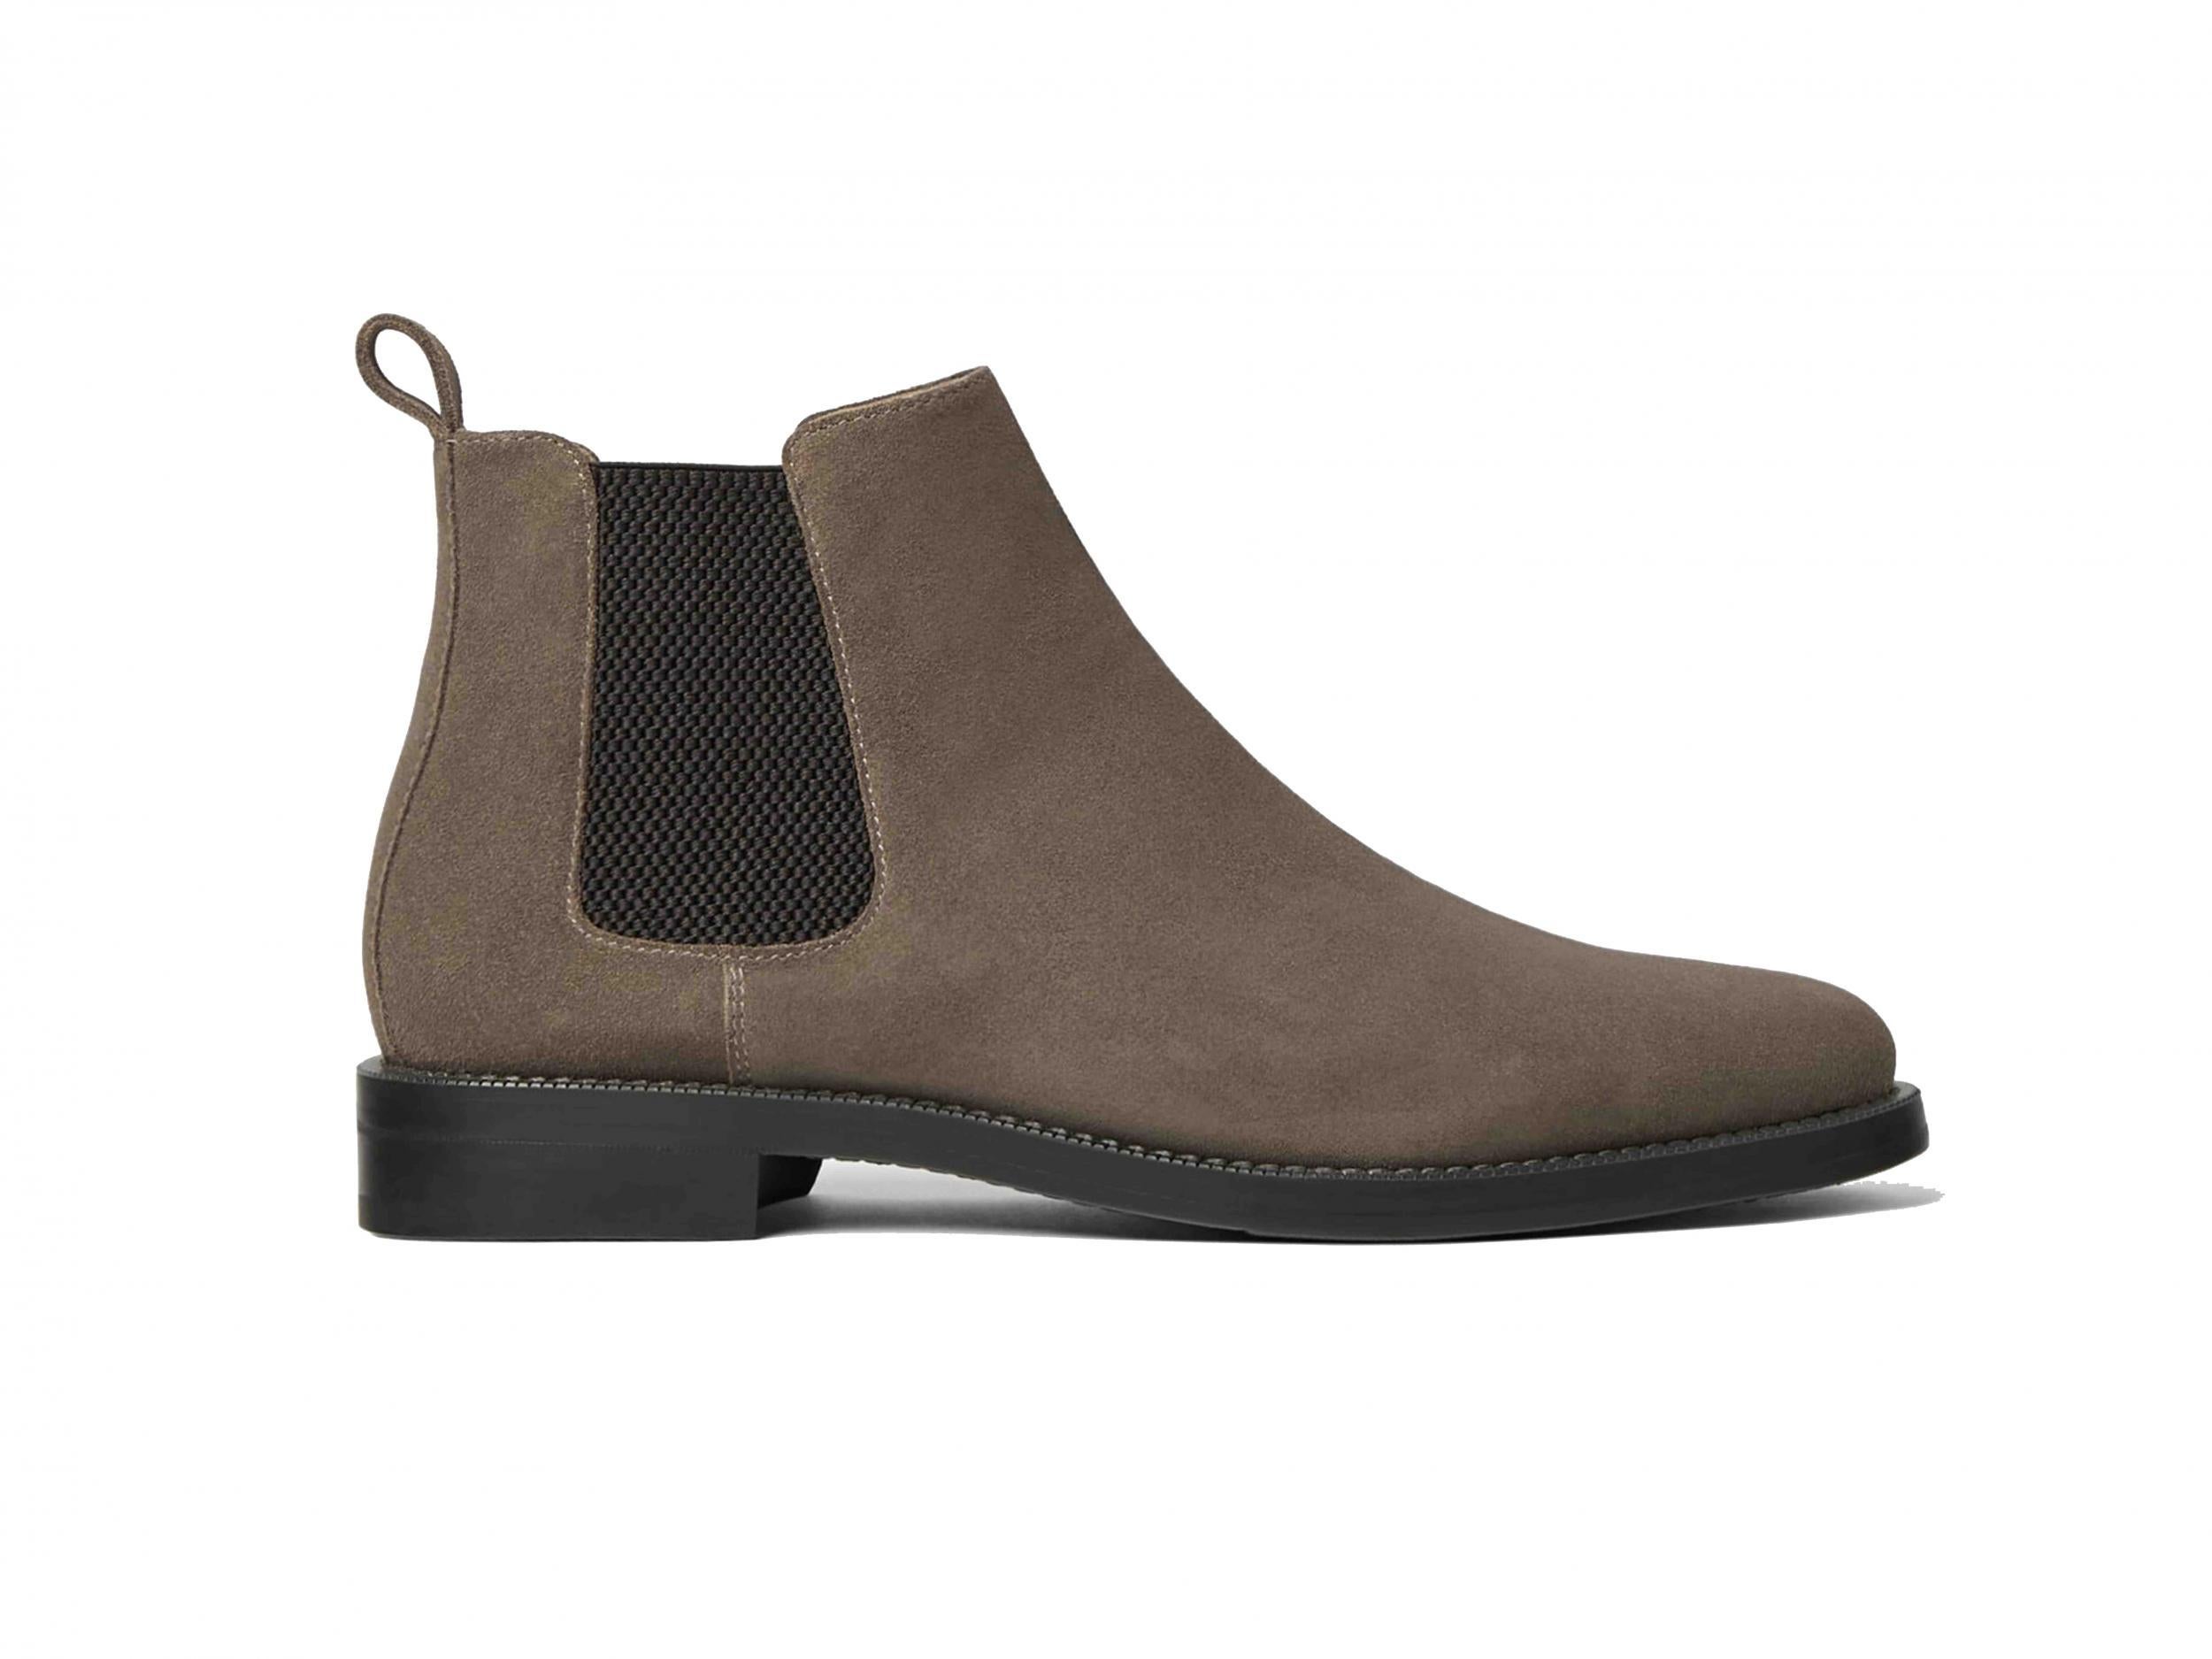 6s chelsea boots